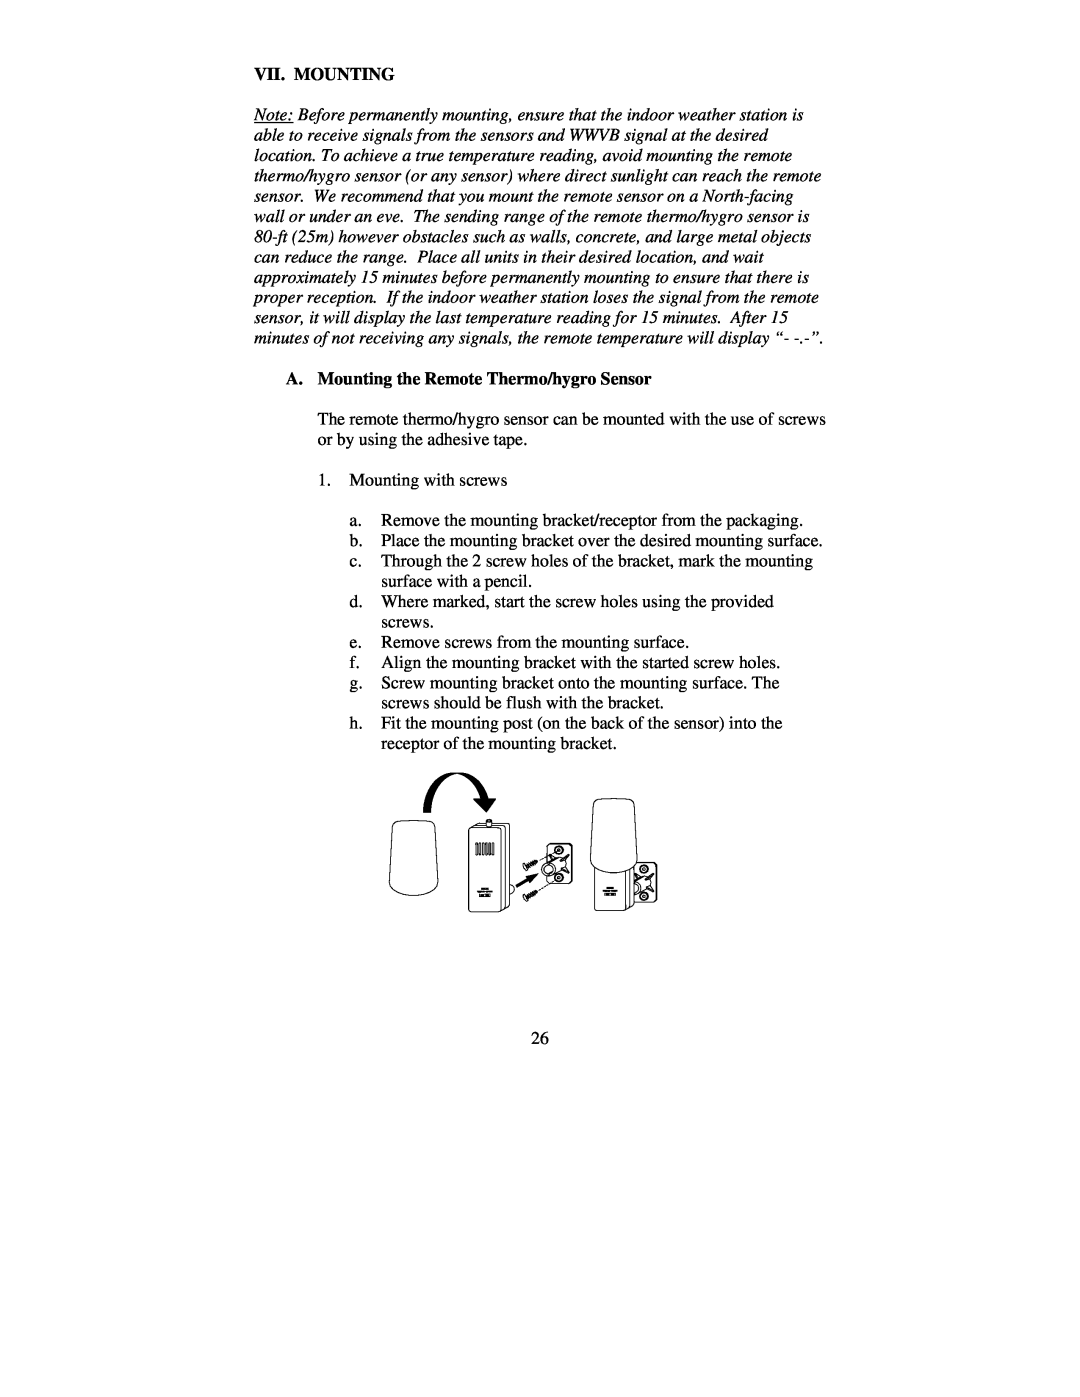 La Crosse Technology WS-8015U instruction manual Vii. Mounting, A.Mounting the Remote Thermo/hygro Sensor 